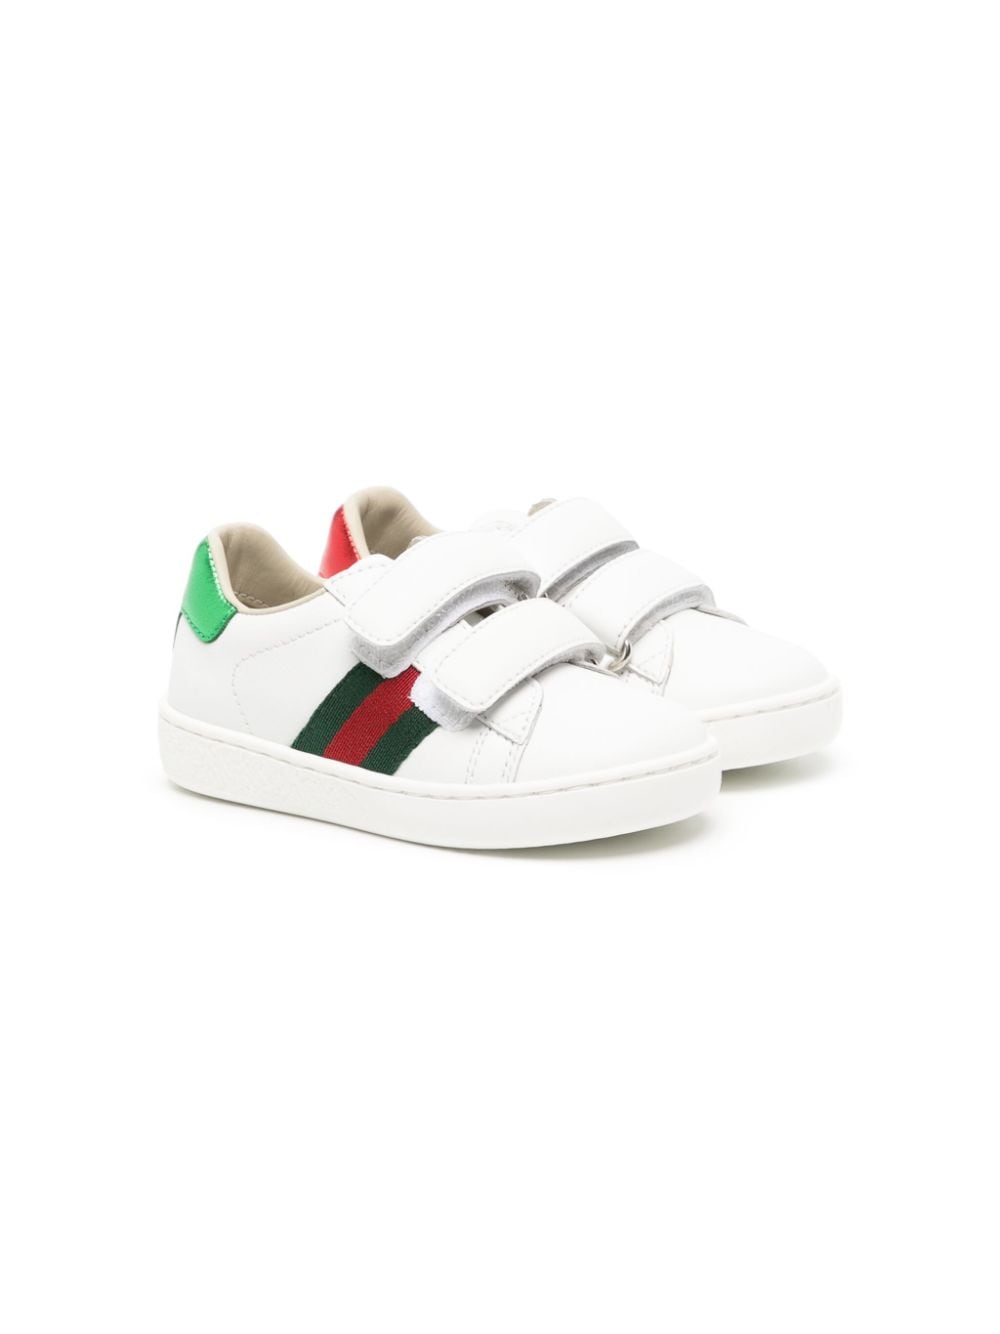 Gucci Kids New Ace leather sneakers - White von Gucci Kids